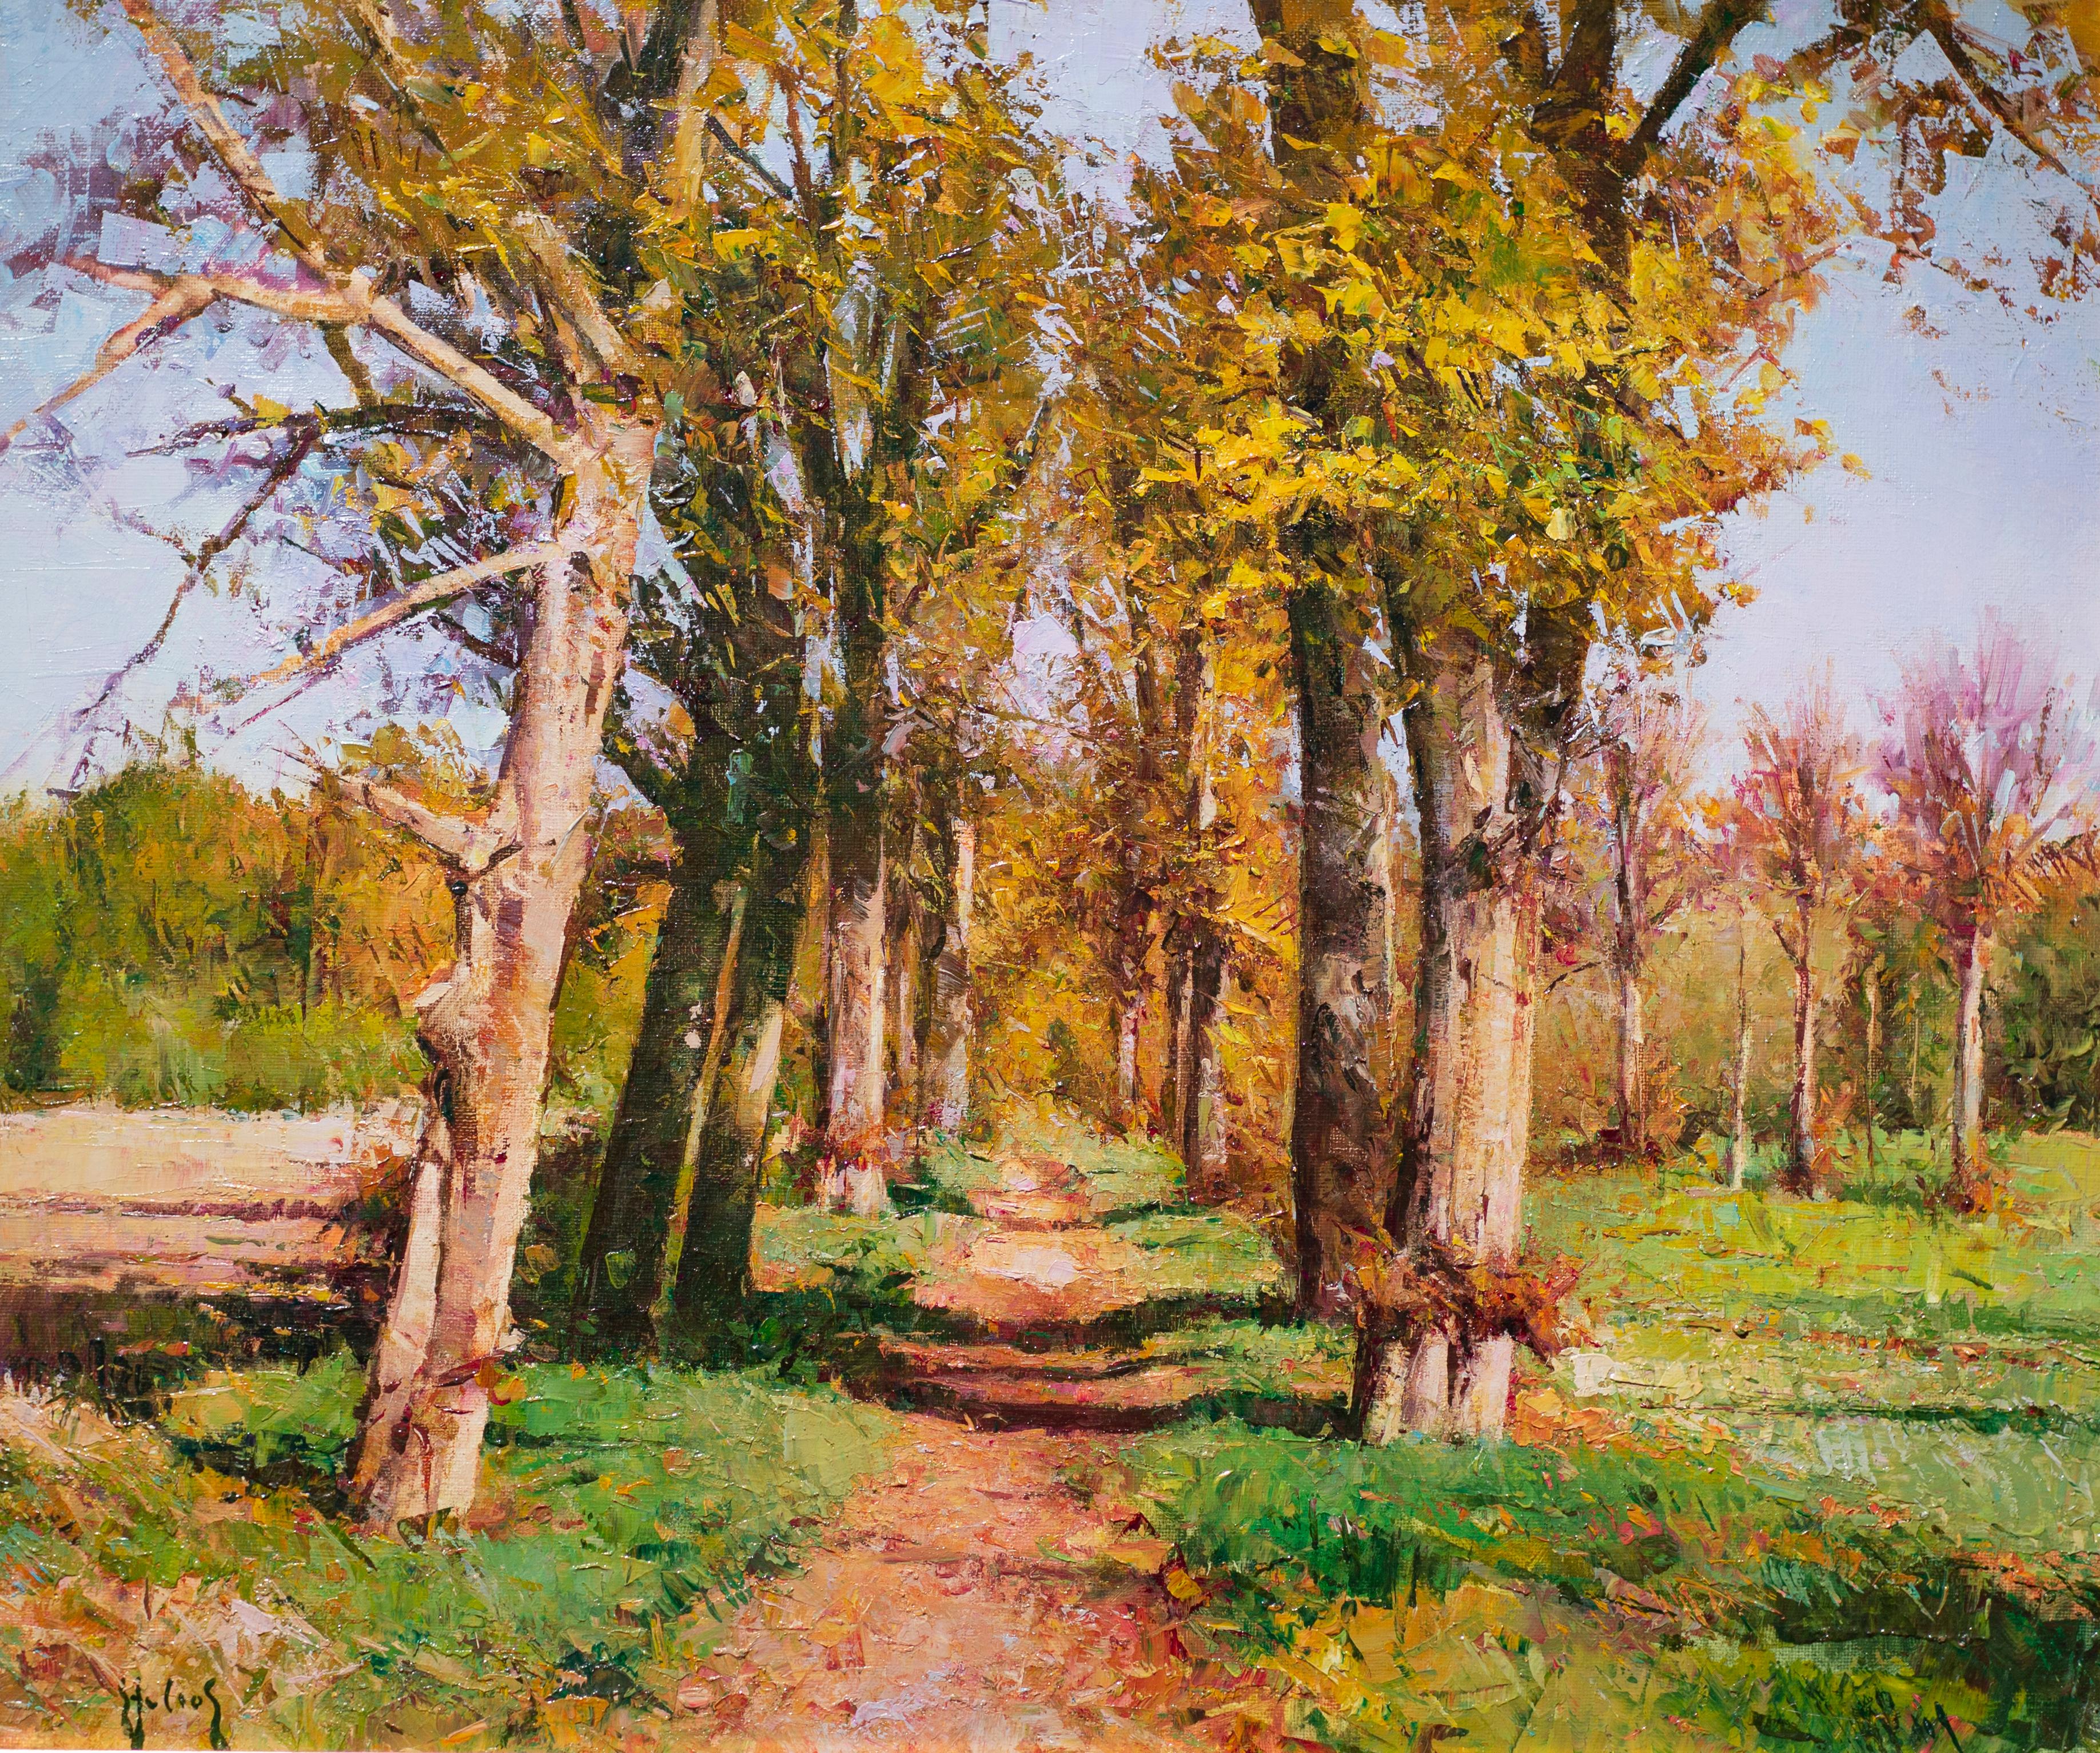 'The Faraway Lane' Contemporary Landscape painting, green trees, summer woodland - Painting by Helios Gisbert